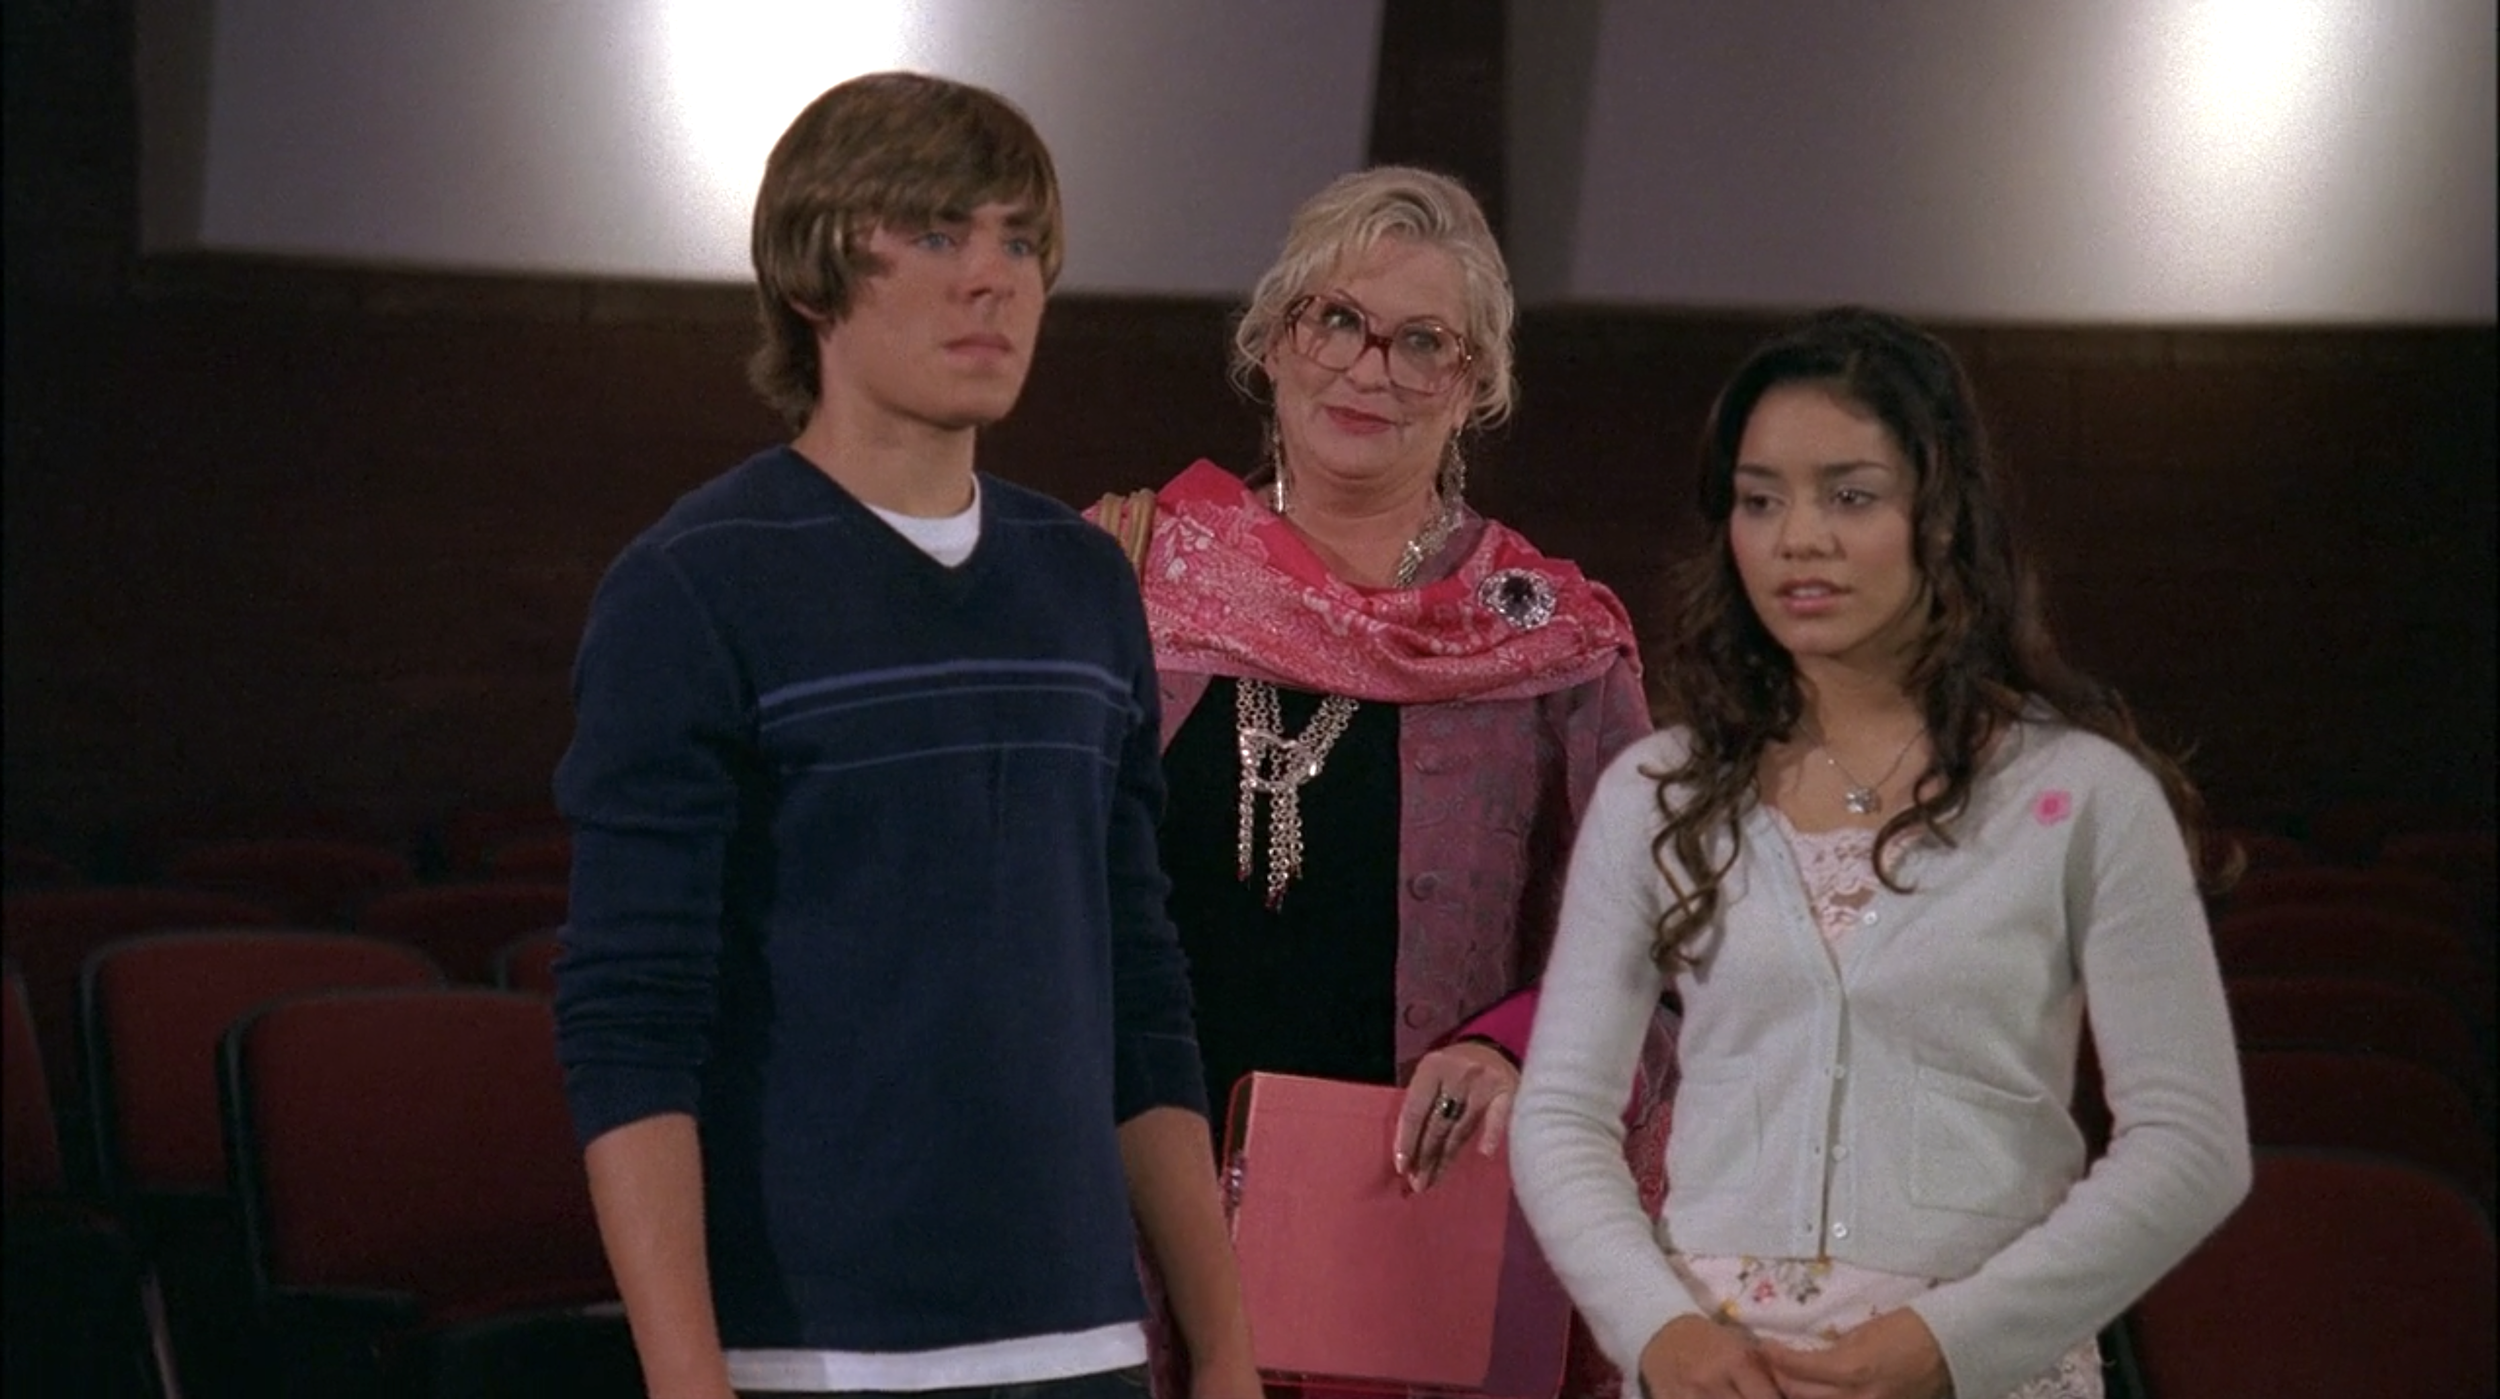 Zac Efron as Troy, Alyson Reed as Ms. Darbus, and Vanessa Hudgens as Gabriella in &quot;High School Musical&quot;